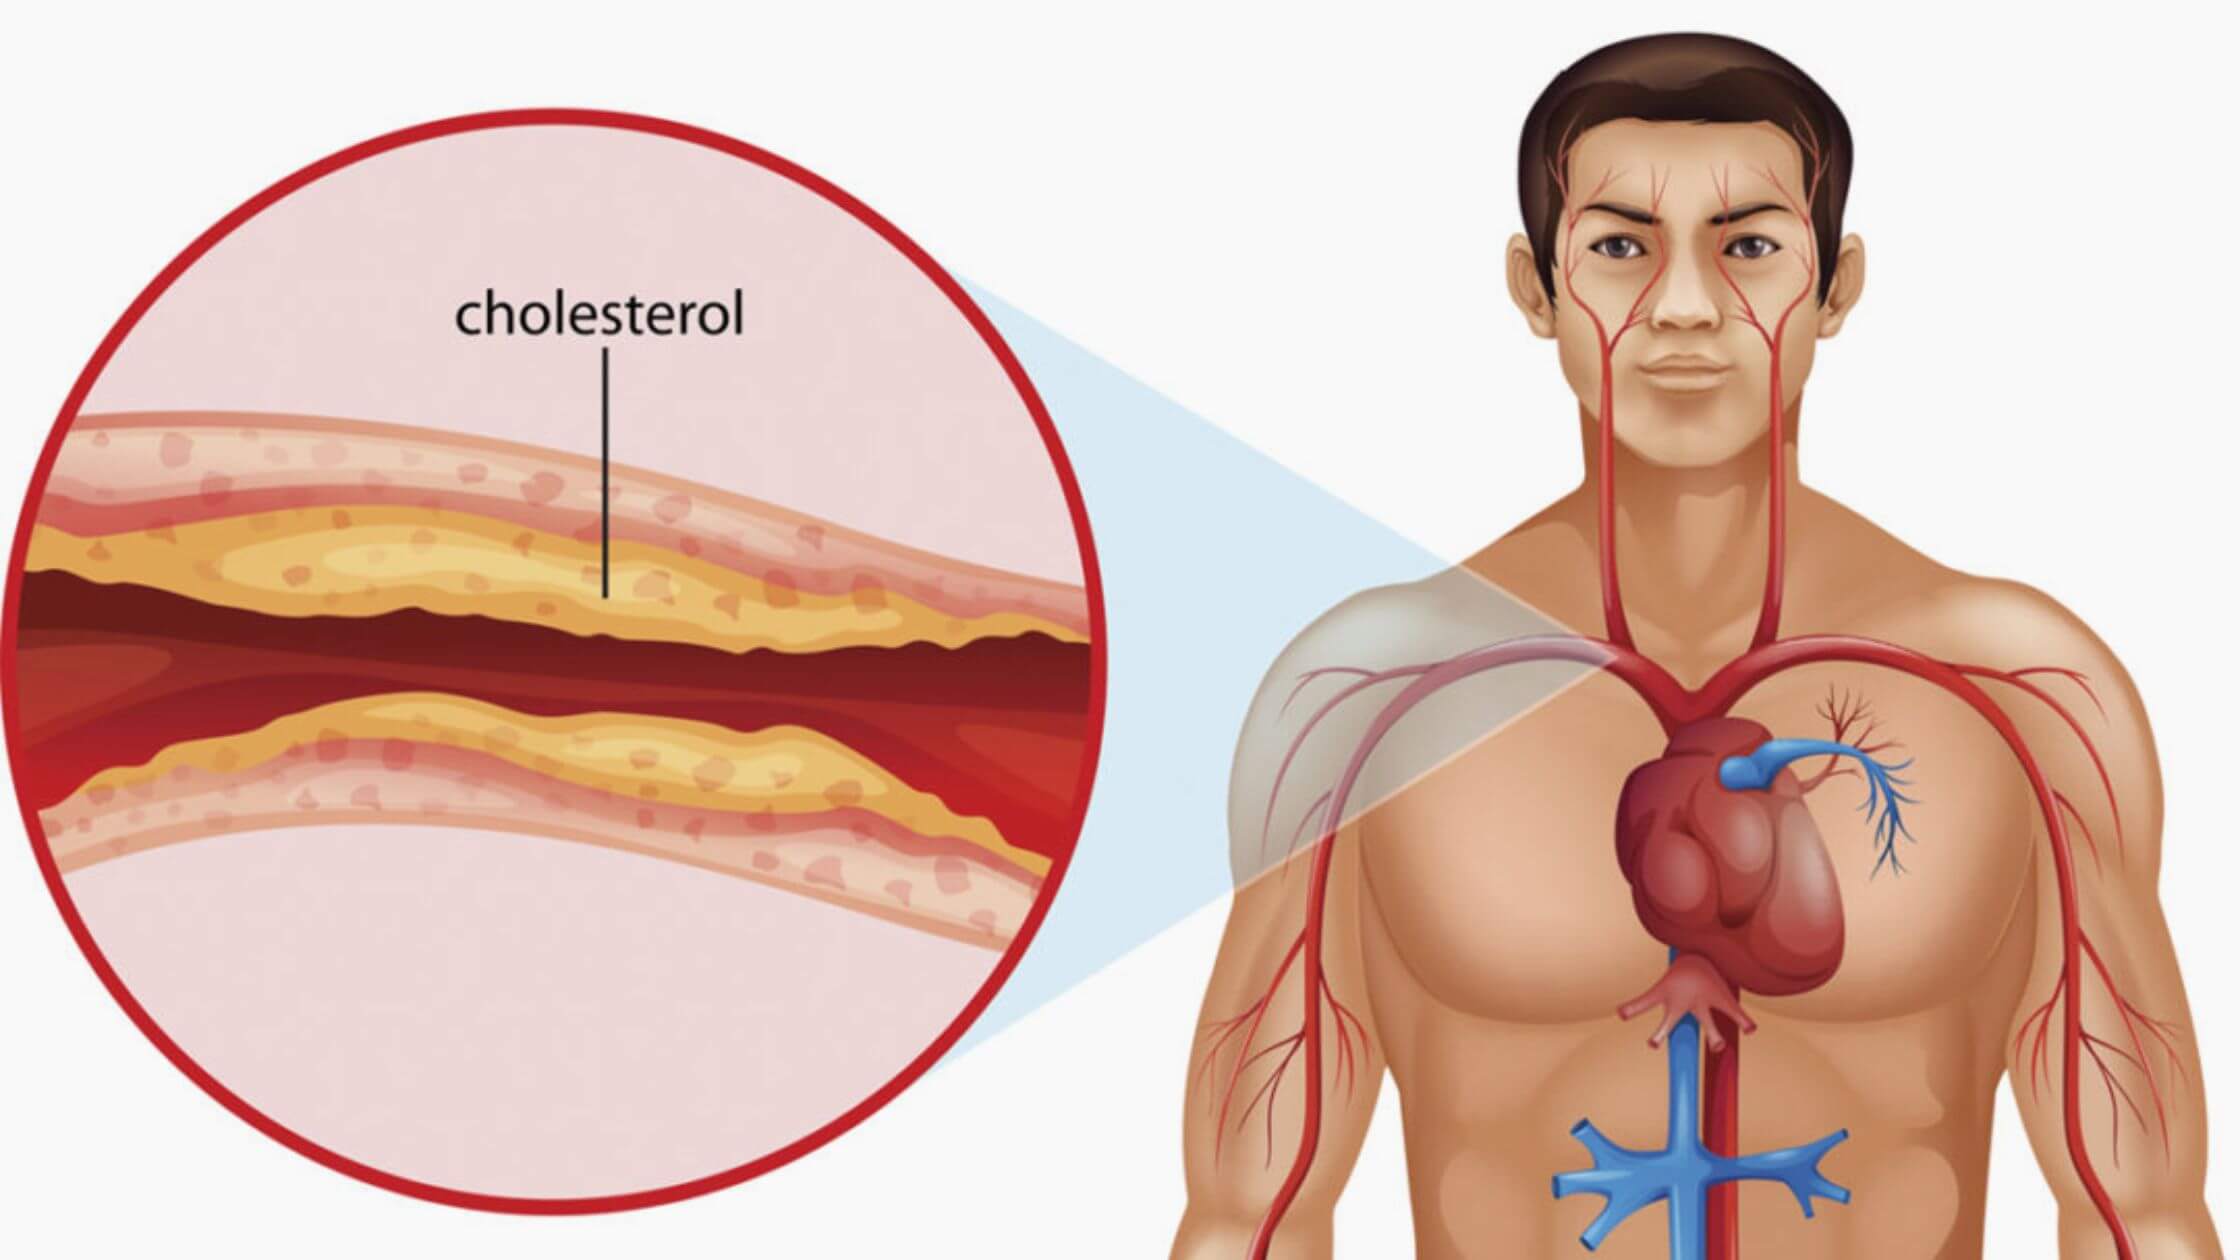 High Cholesterol: The Signs In Your Leg Warning Of Extremely Damaging Levels